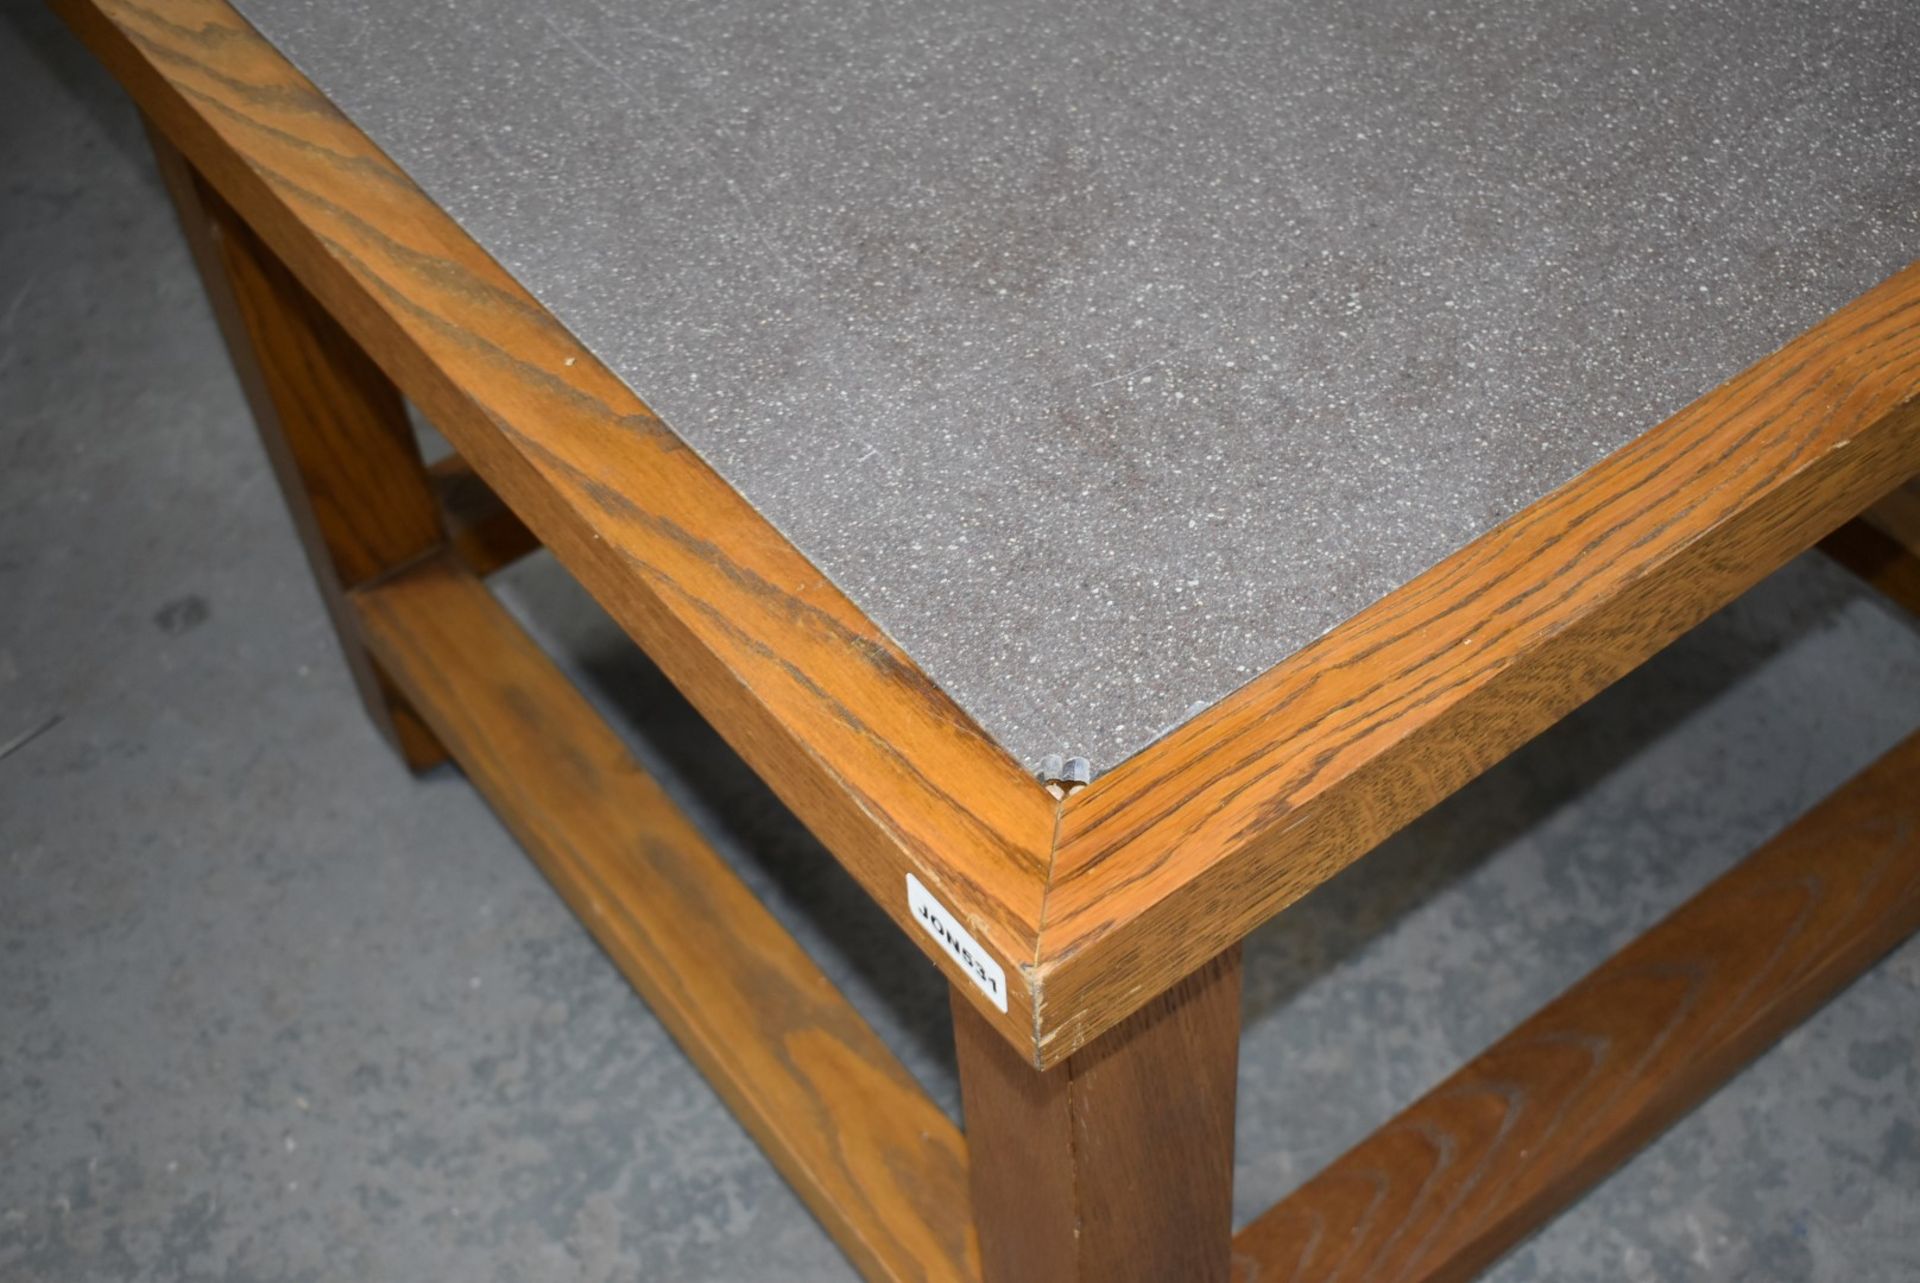 1 x Solid Oak Table With a Stone Insert Top - H77 x W100 x D100 cms - Image 4 of 9